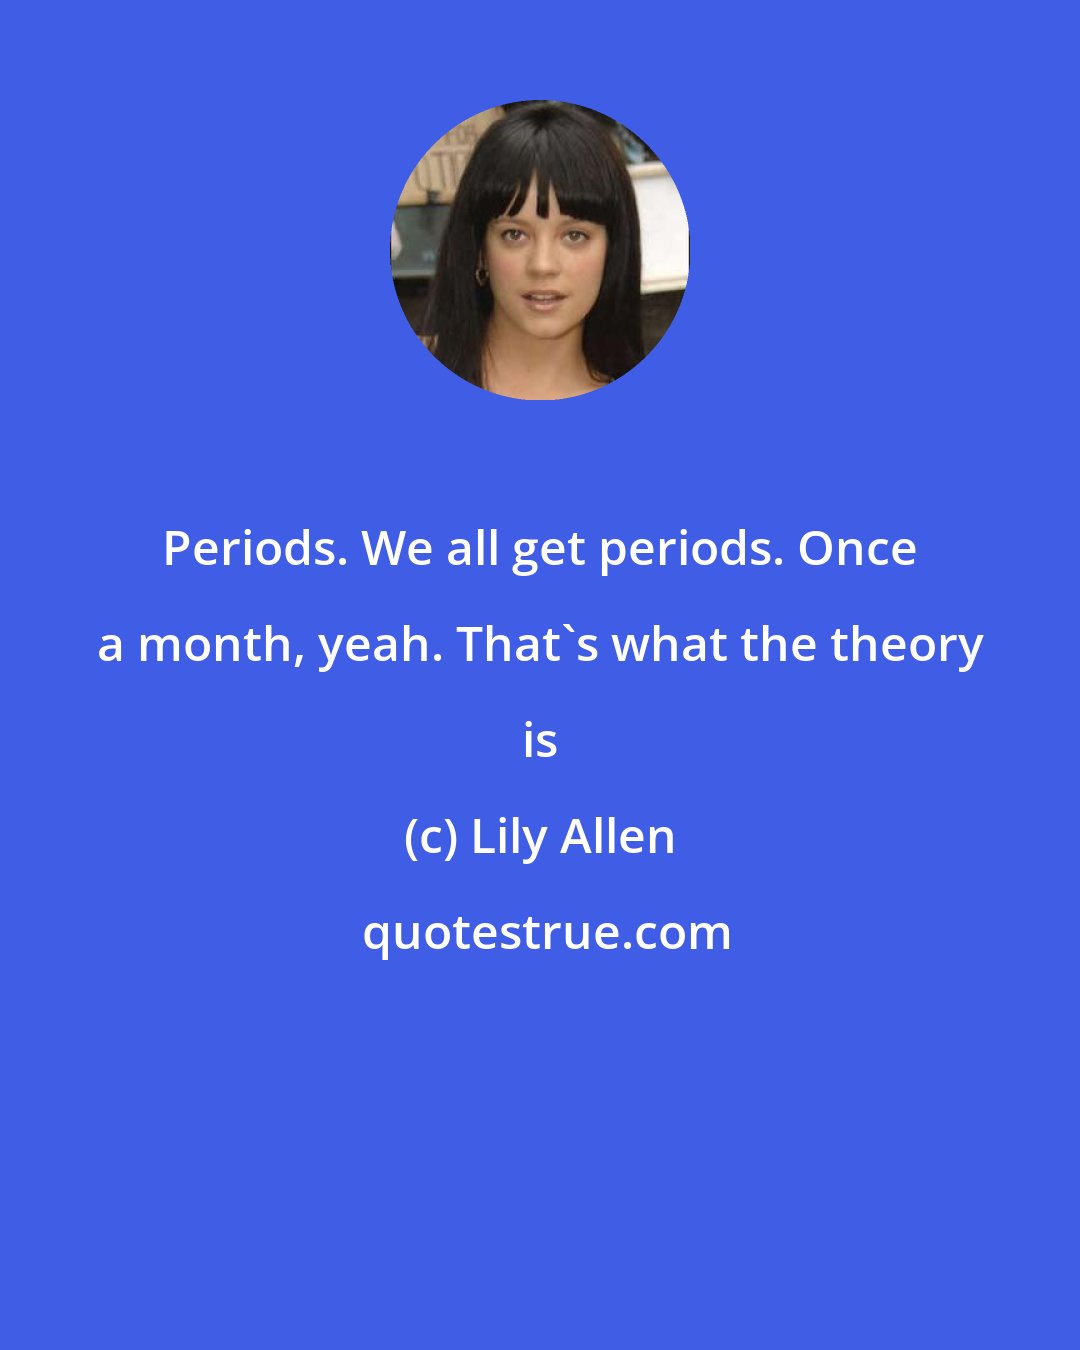 Lily Allen: Periods. We all get periods. Once a month, yeah. That's what the theory is